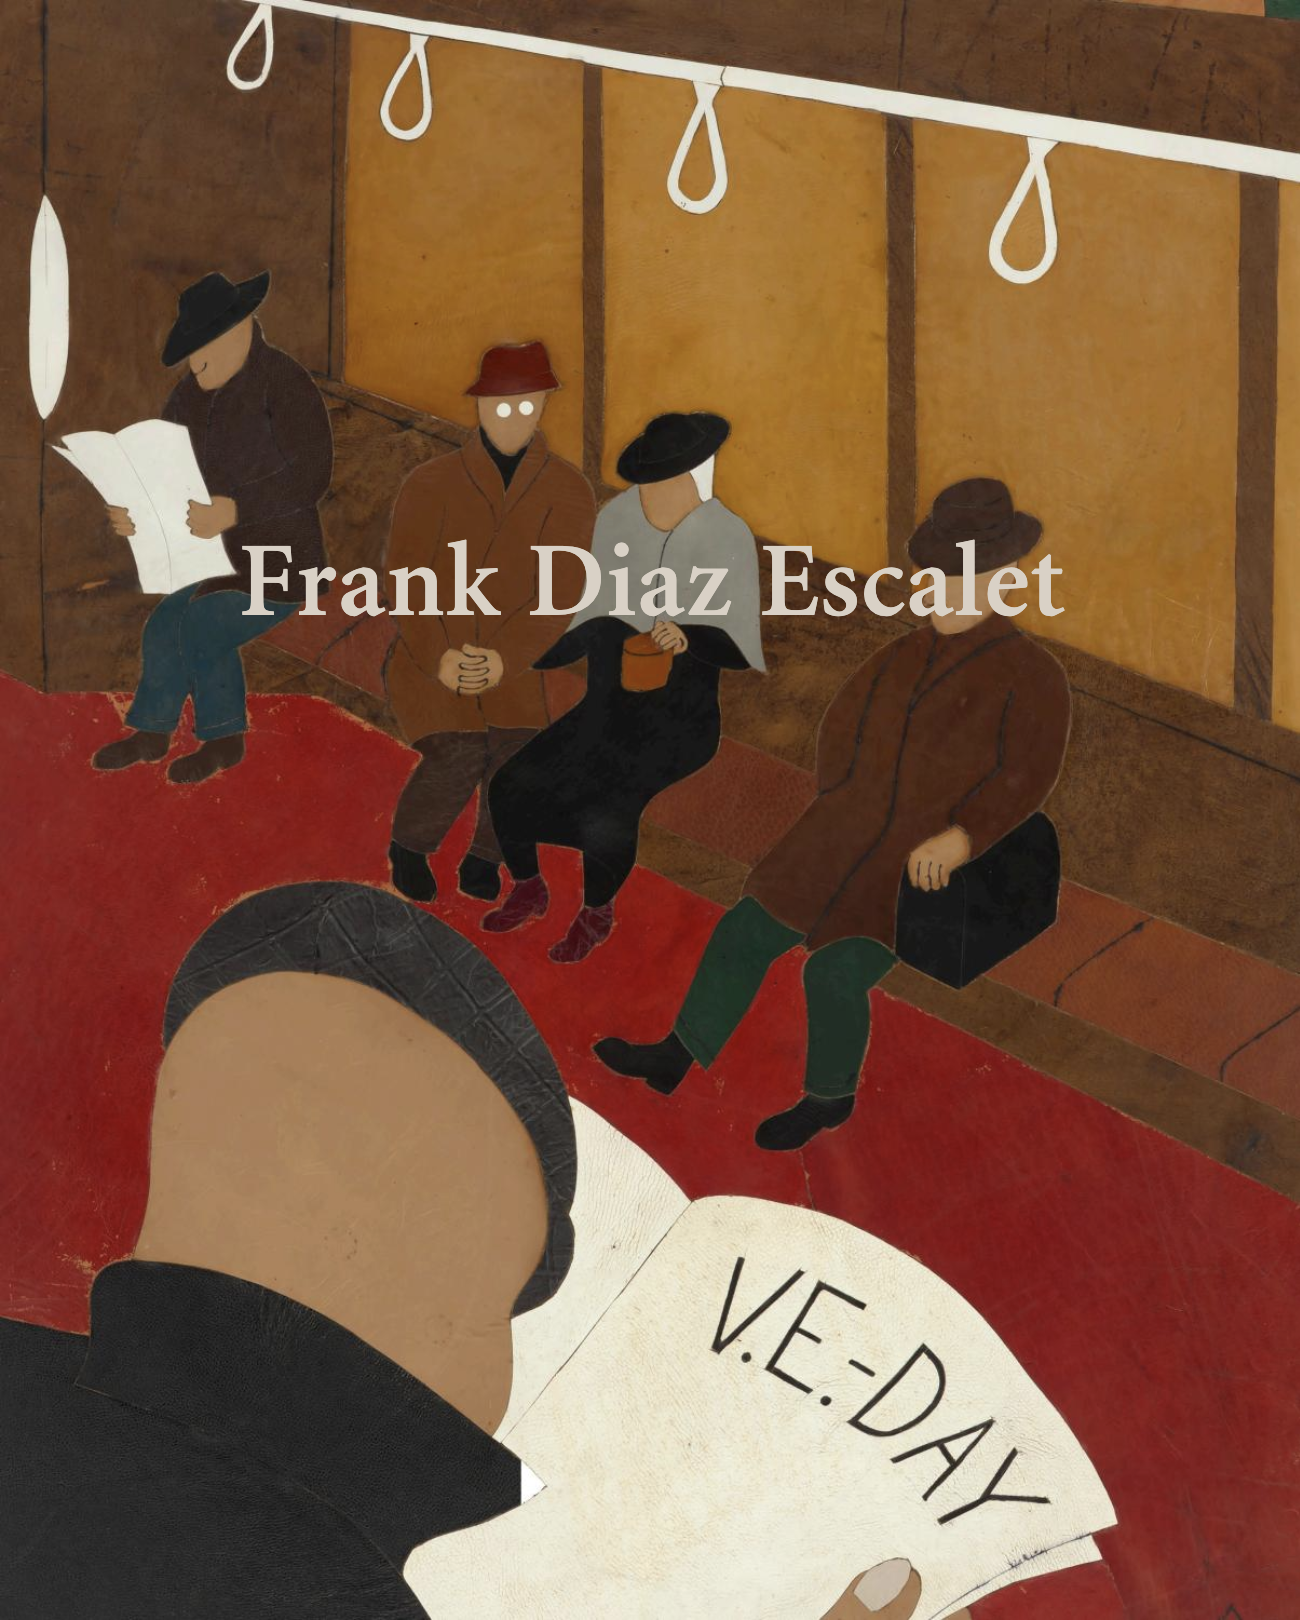 Frank Diaz Escalet # 2021 &lt;alt="Catalogue cover with title over image of people on a subway with a man reading a newspaper in red, blue, while, and earthy colors"&gt; 